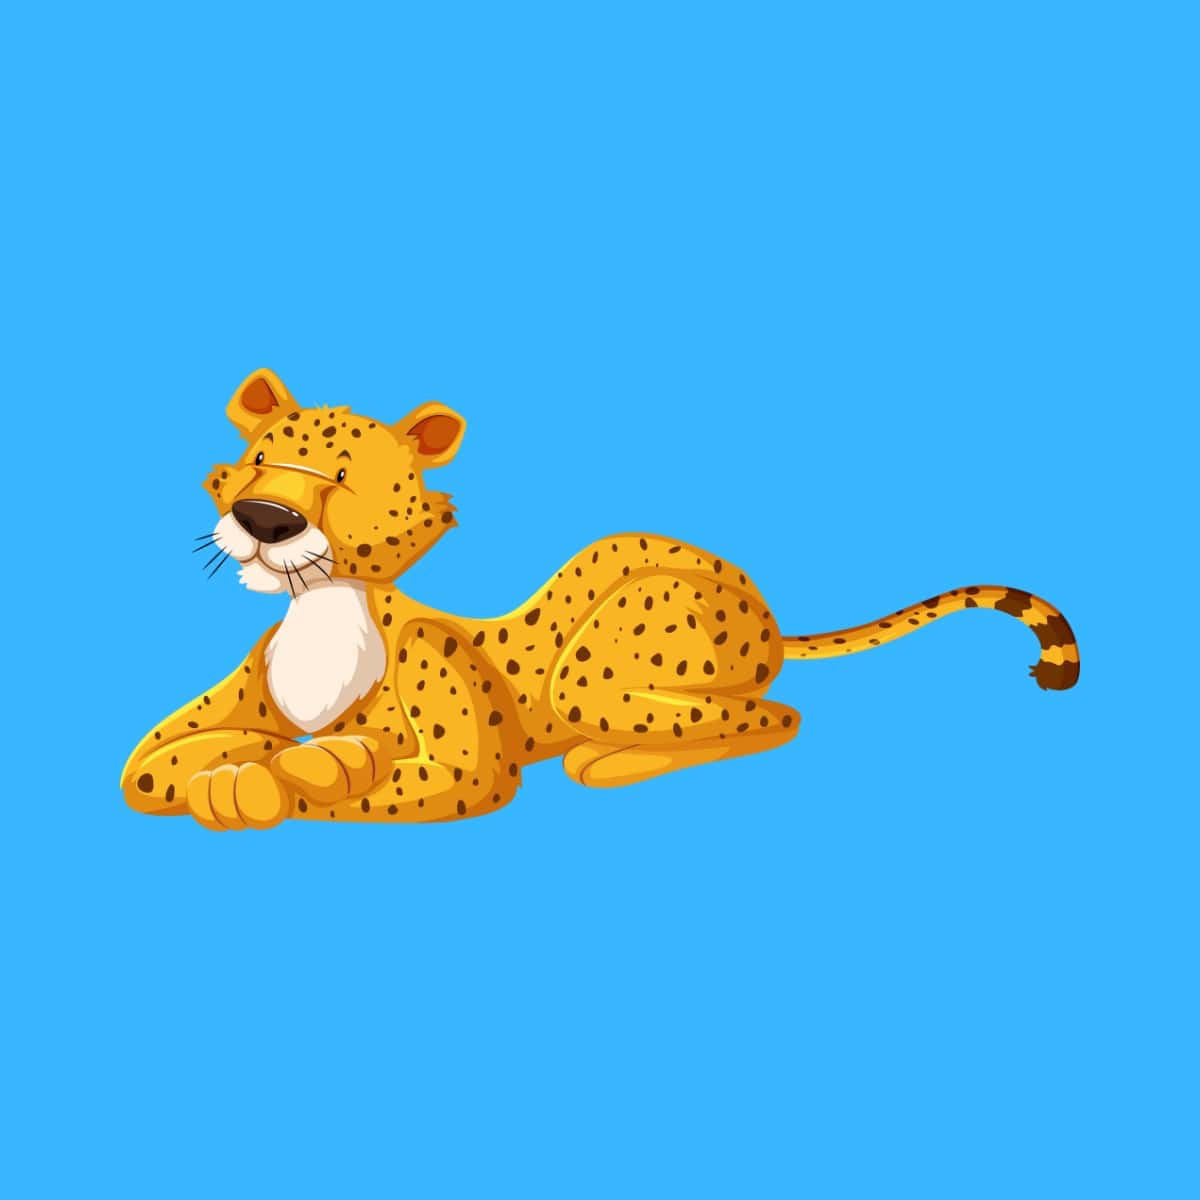 Cartoon graphic of a kind cheetah lying on a blue background.